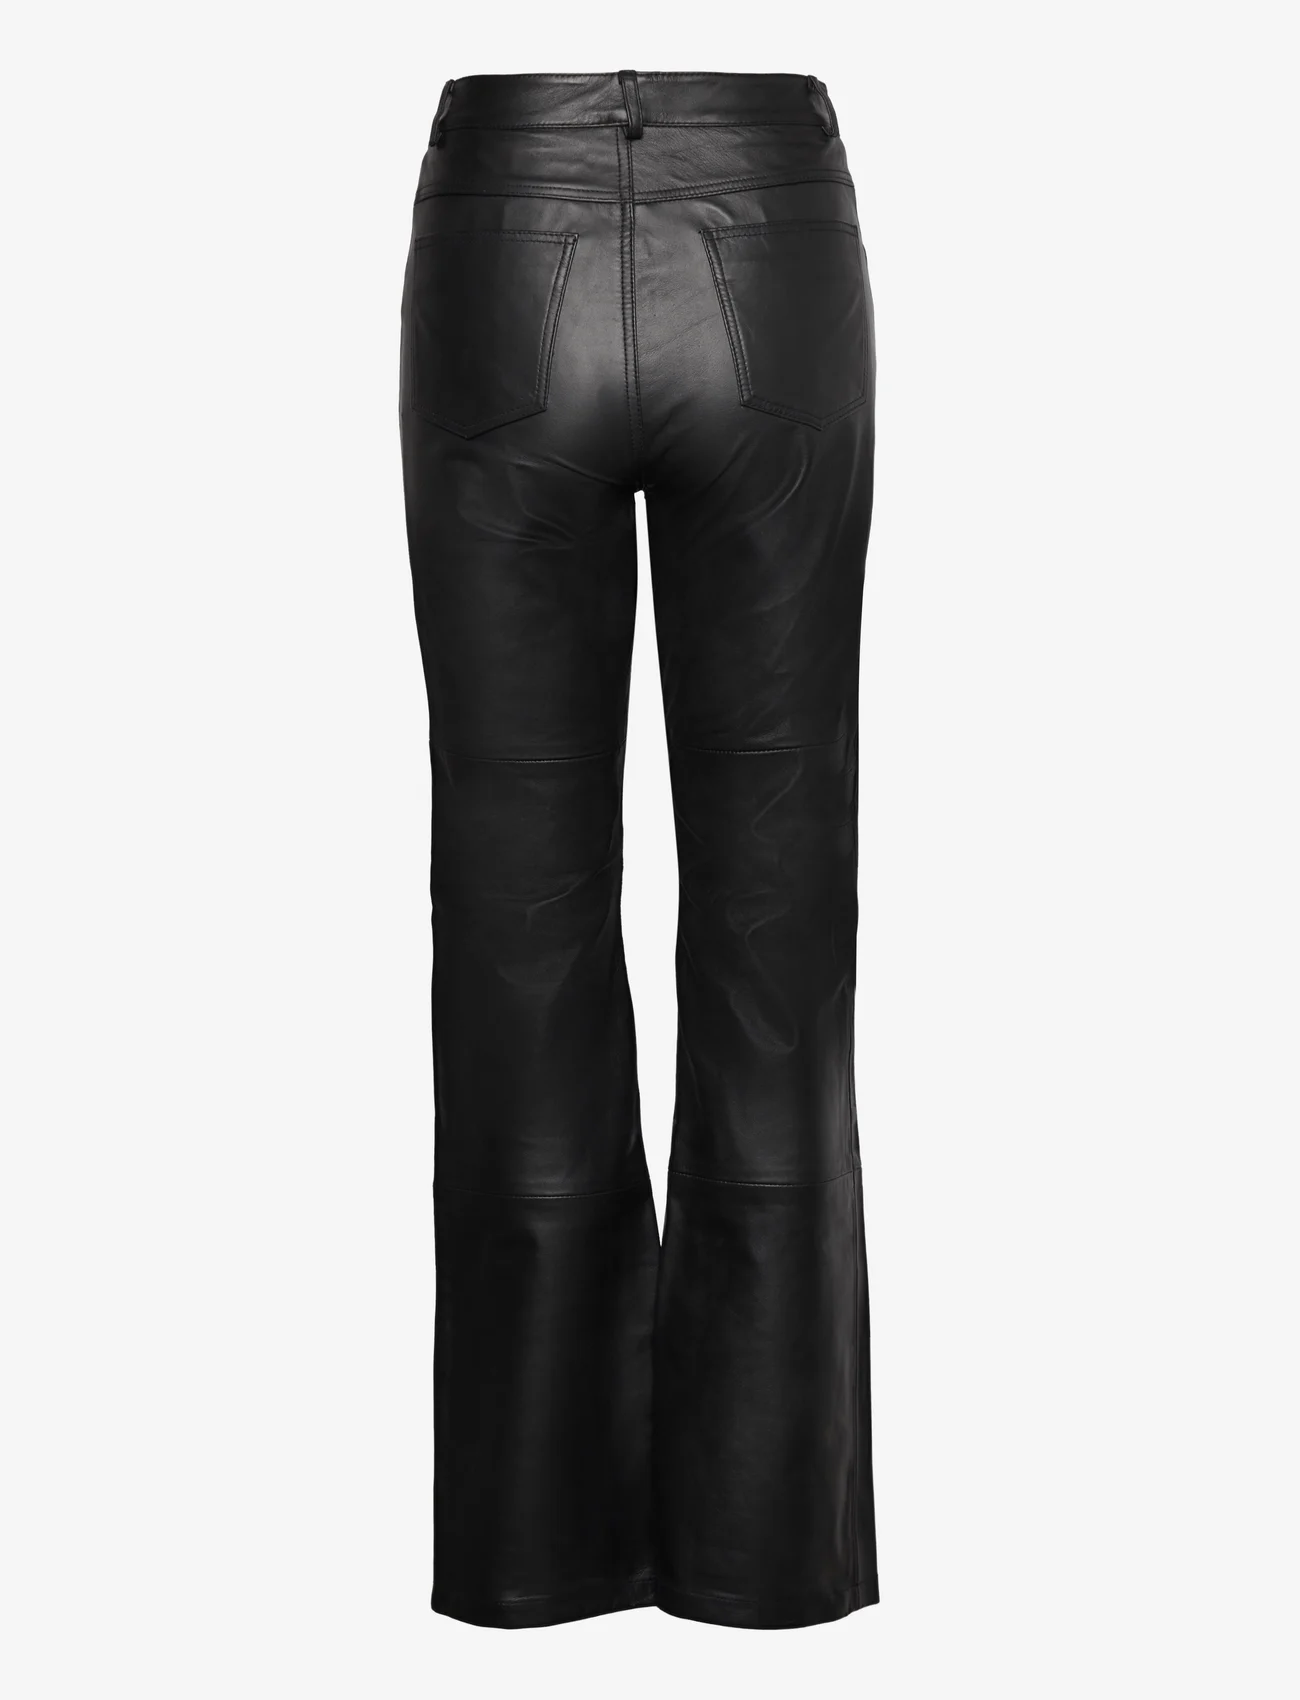 Deadwood - Phoebe Pant - party wear at outlet prices - black - 1